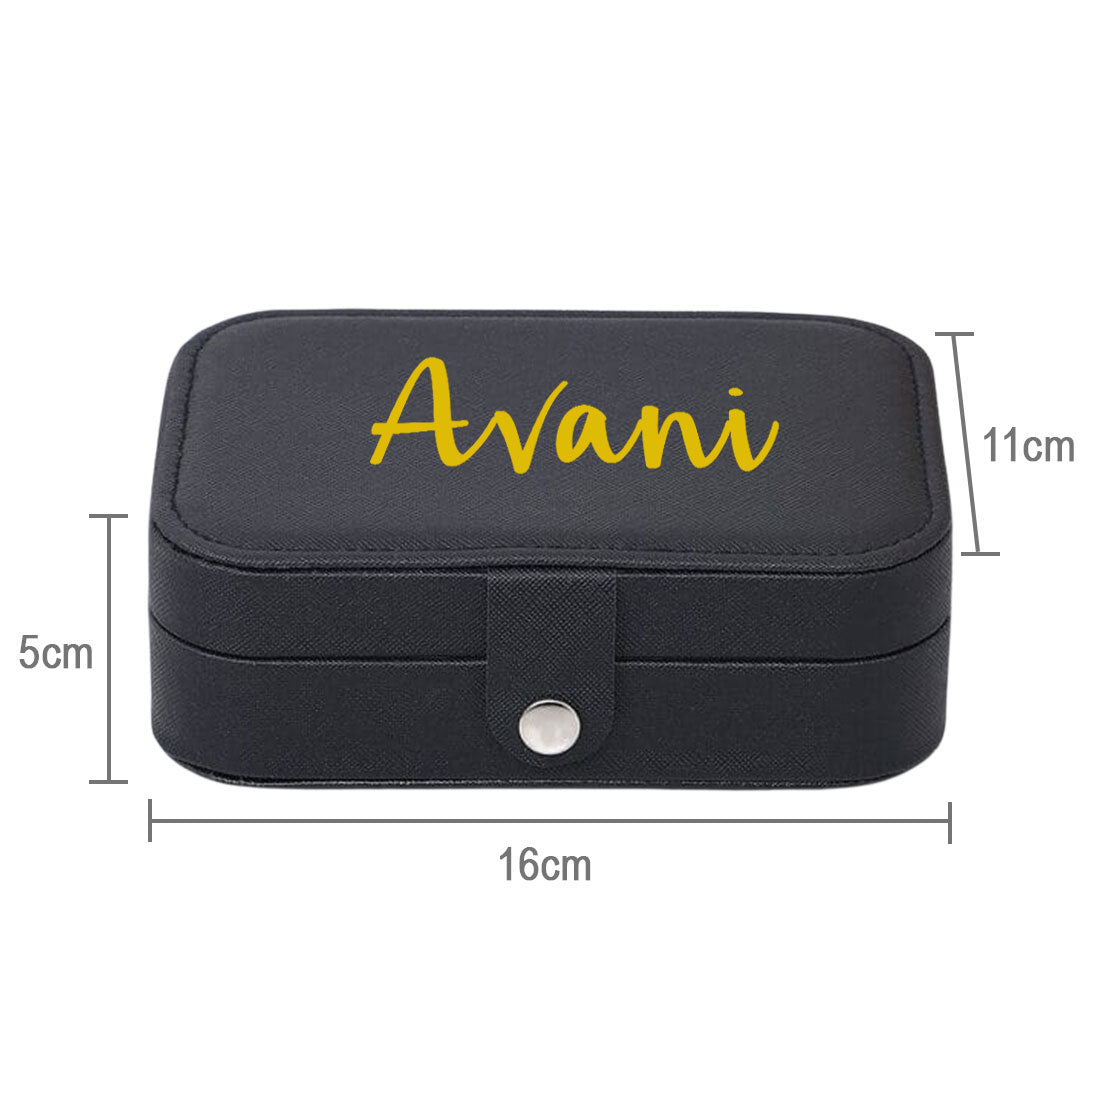 Personalised jewellery Box Organizer for Travel Storage Case for Rings Earrings and Pendants